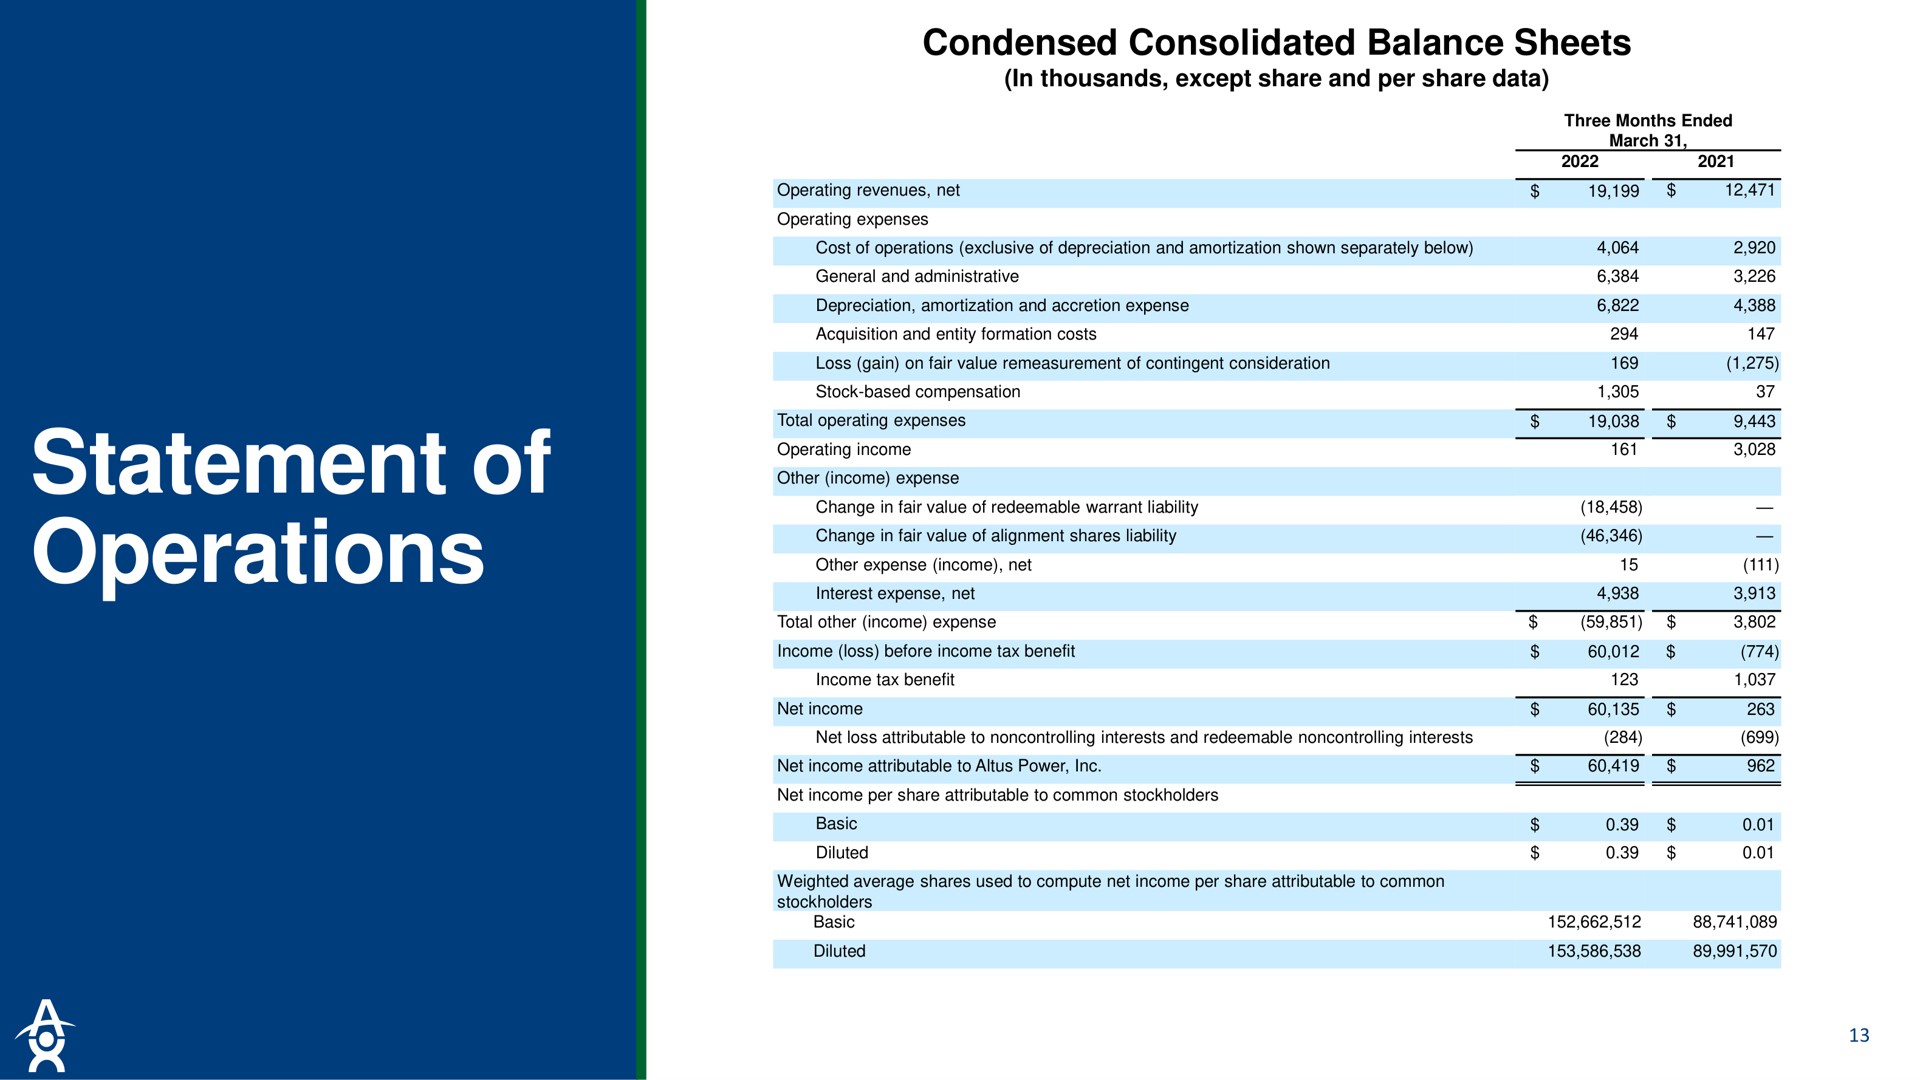 statement of operations condensed consolidated balance sheets | Altus Power